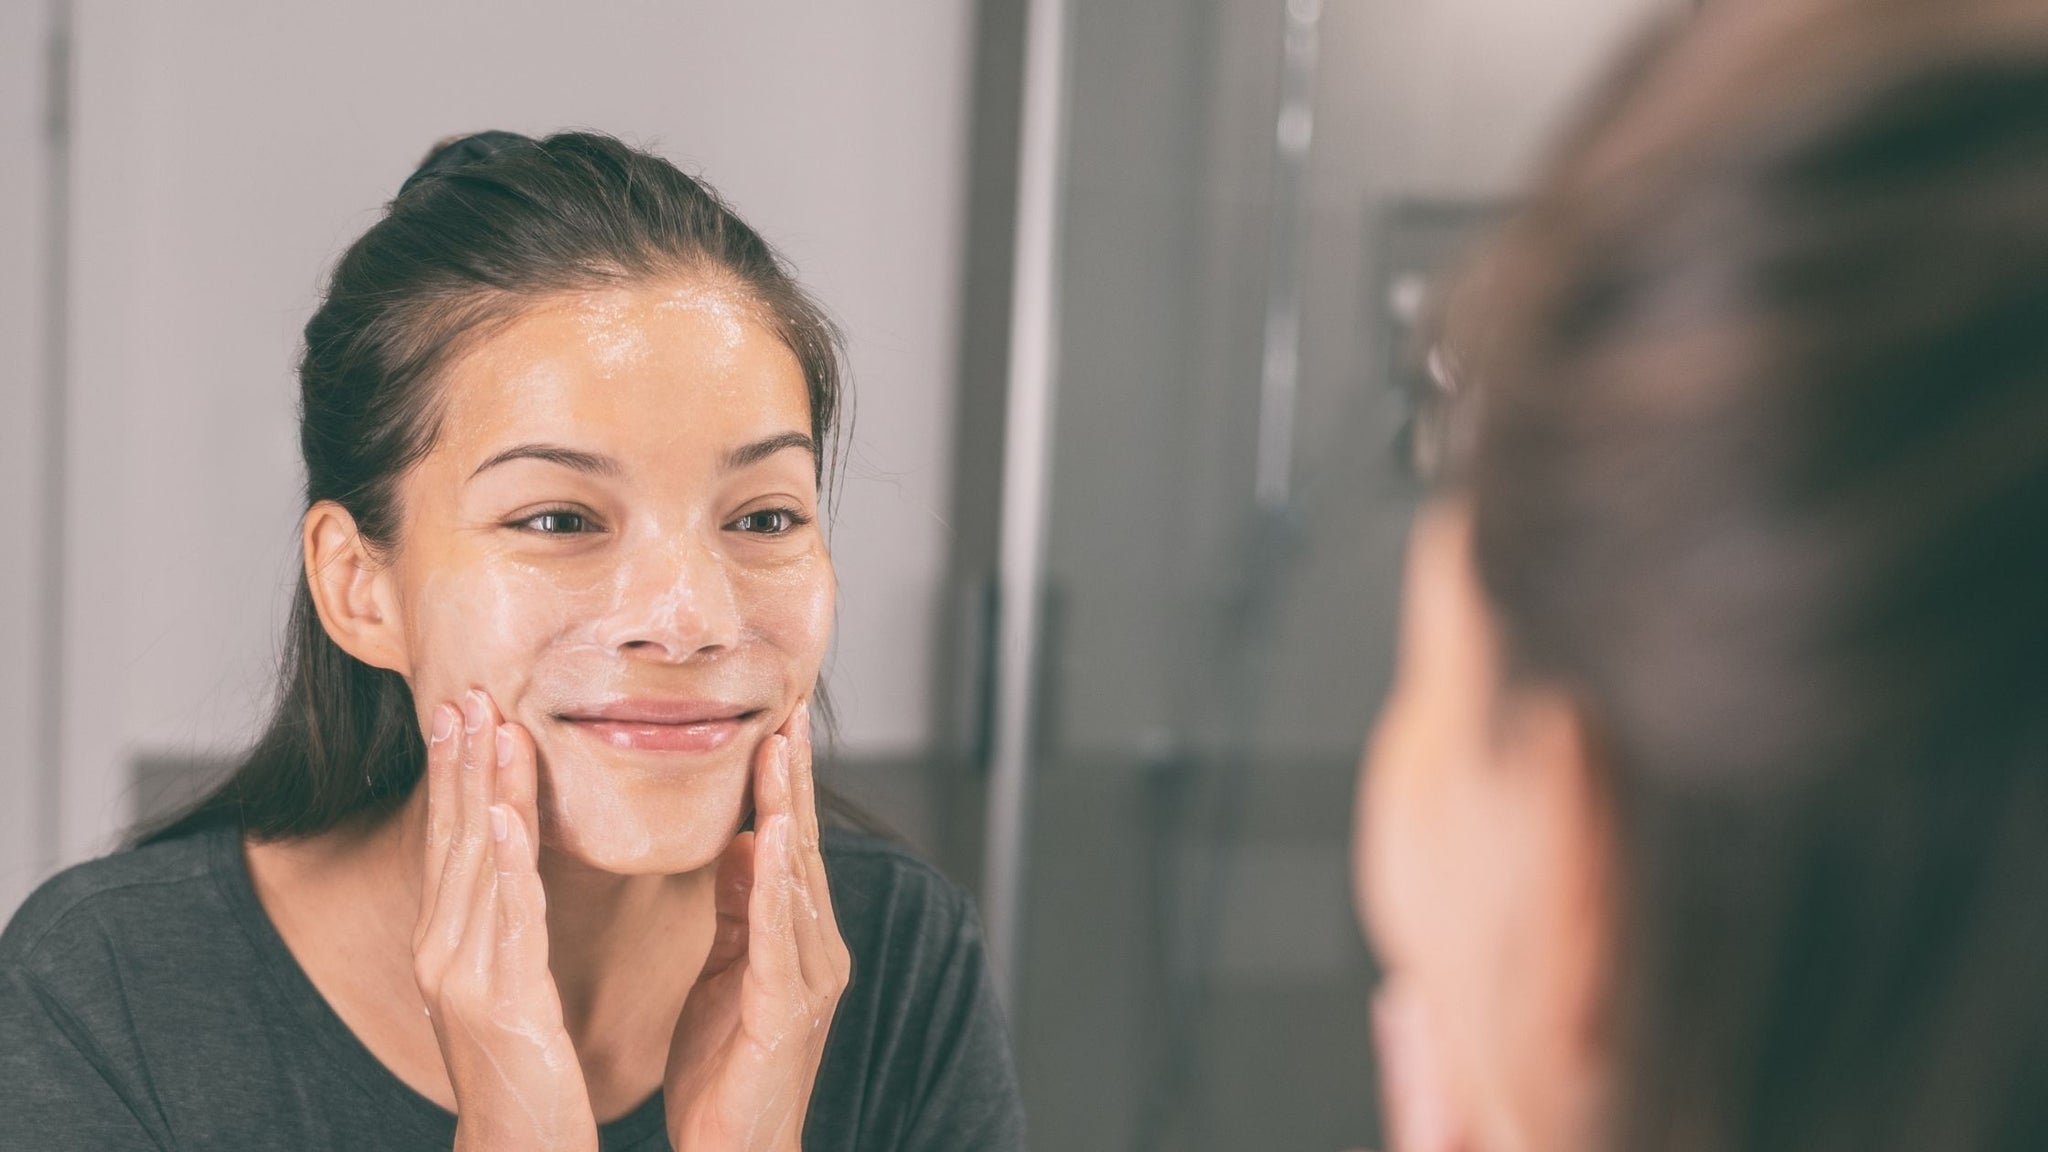 How To Choose The Best Face Wash For Oily Skin With Oil-control & Oil-Balancing Ingredients